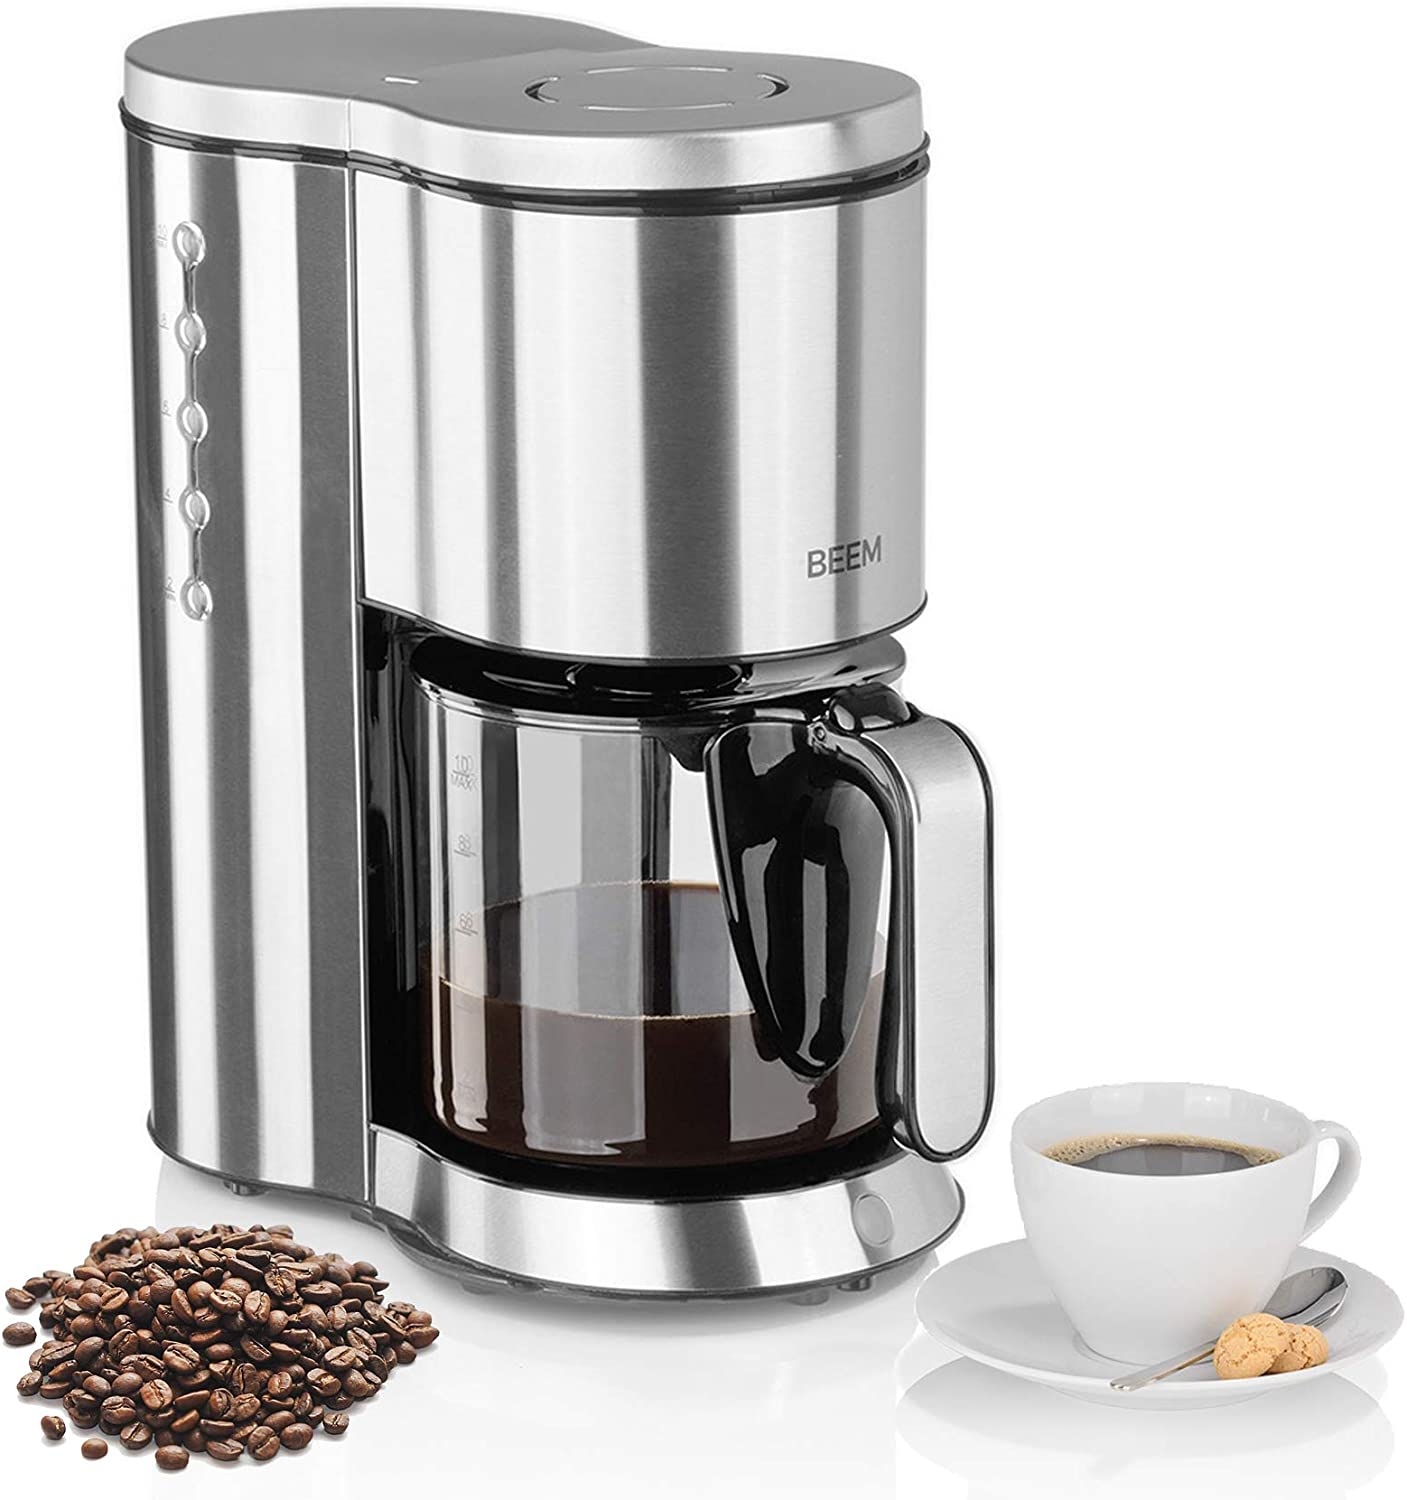 BEEM Filter Coffee Machine Stainless Steel - Glass Basic Selection Coffee Machine 1.25 L Glass Jug 1250 W Smart Operation Keep Warm Function 10 Cups Coffee Permanent Filter Modern Design